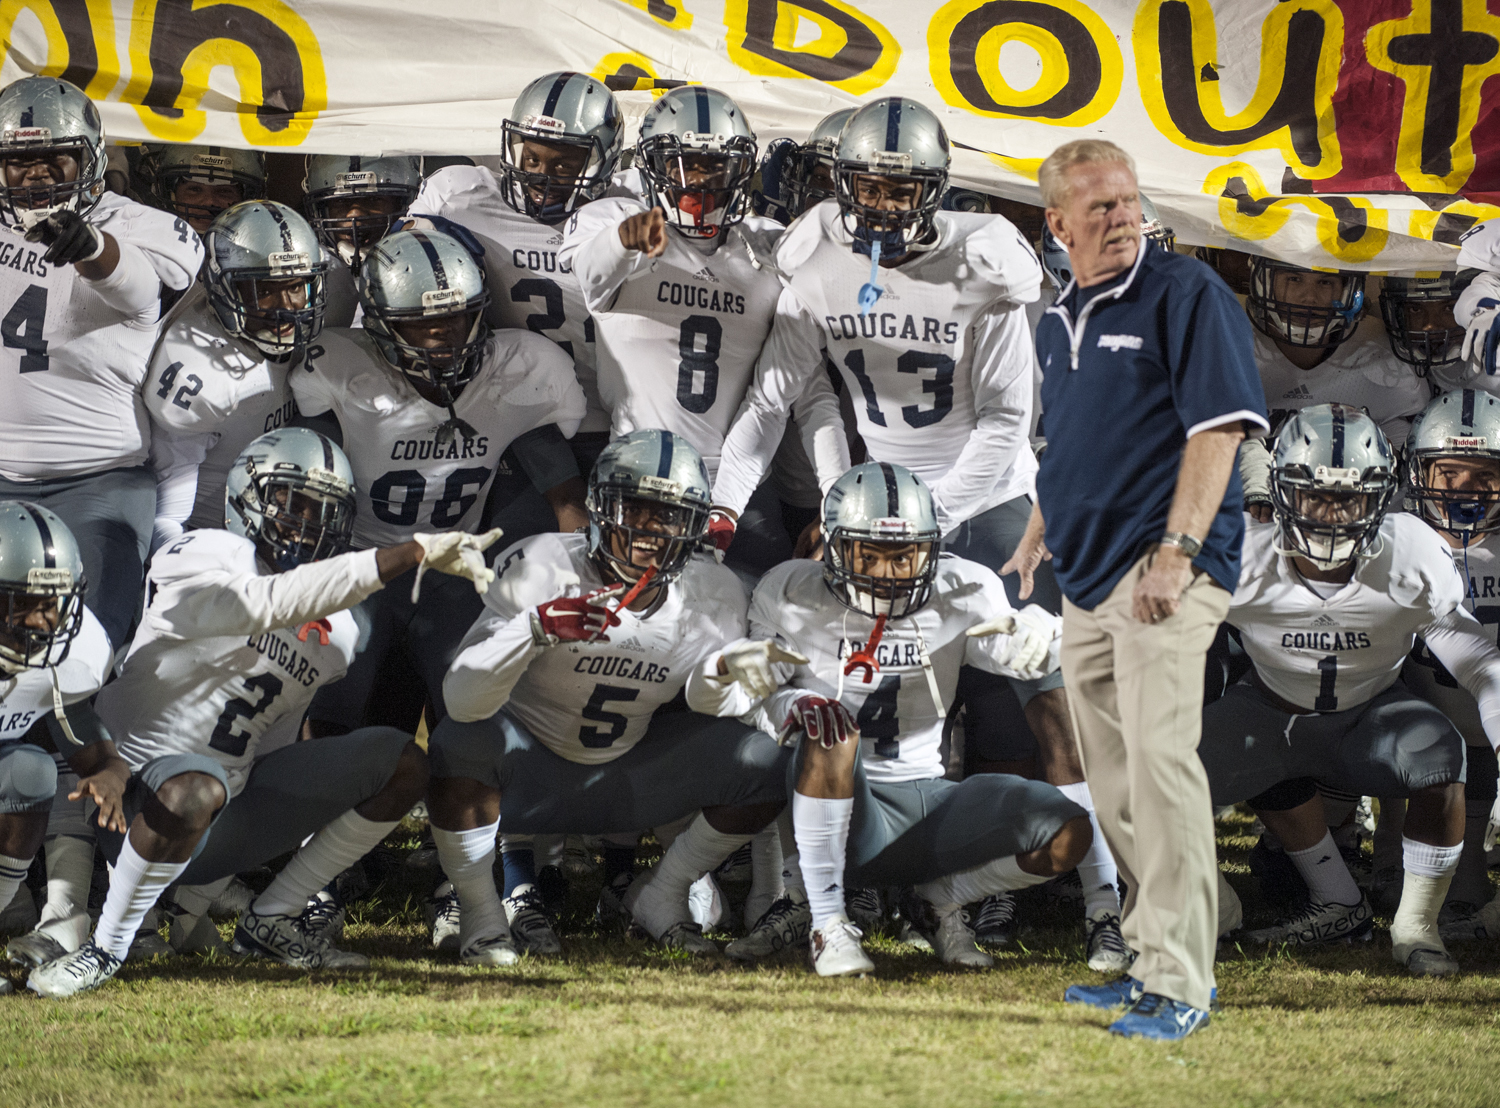 No. 6 Clay-Chalkville defeated Gardendale for the 6A-6 Region title Friday. (Photo: James "Nick" Nicholas for Clay-Chalkville football).